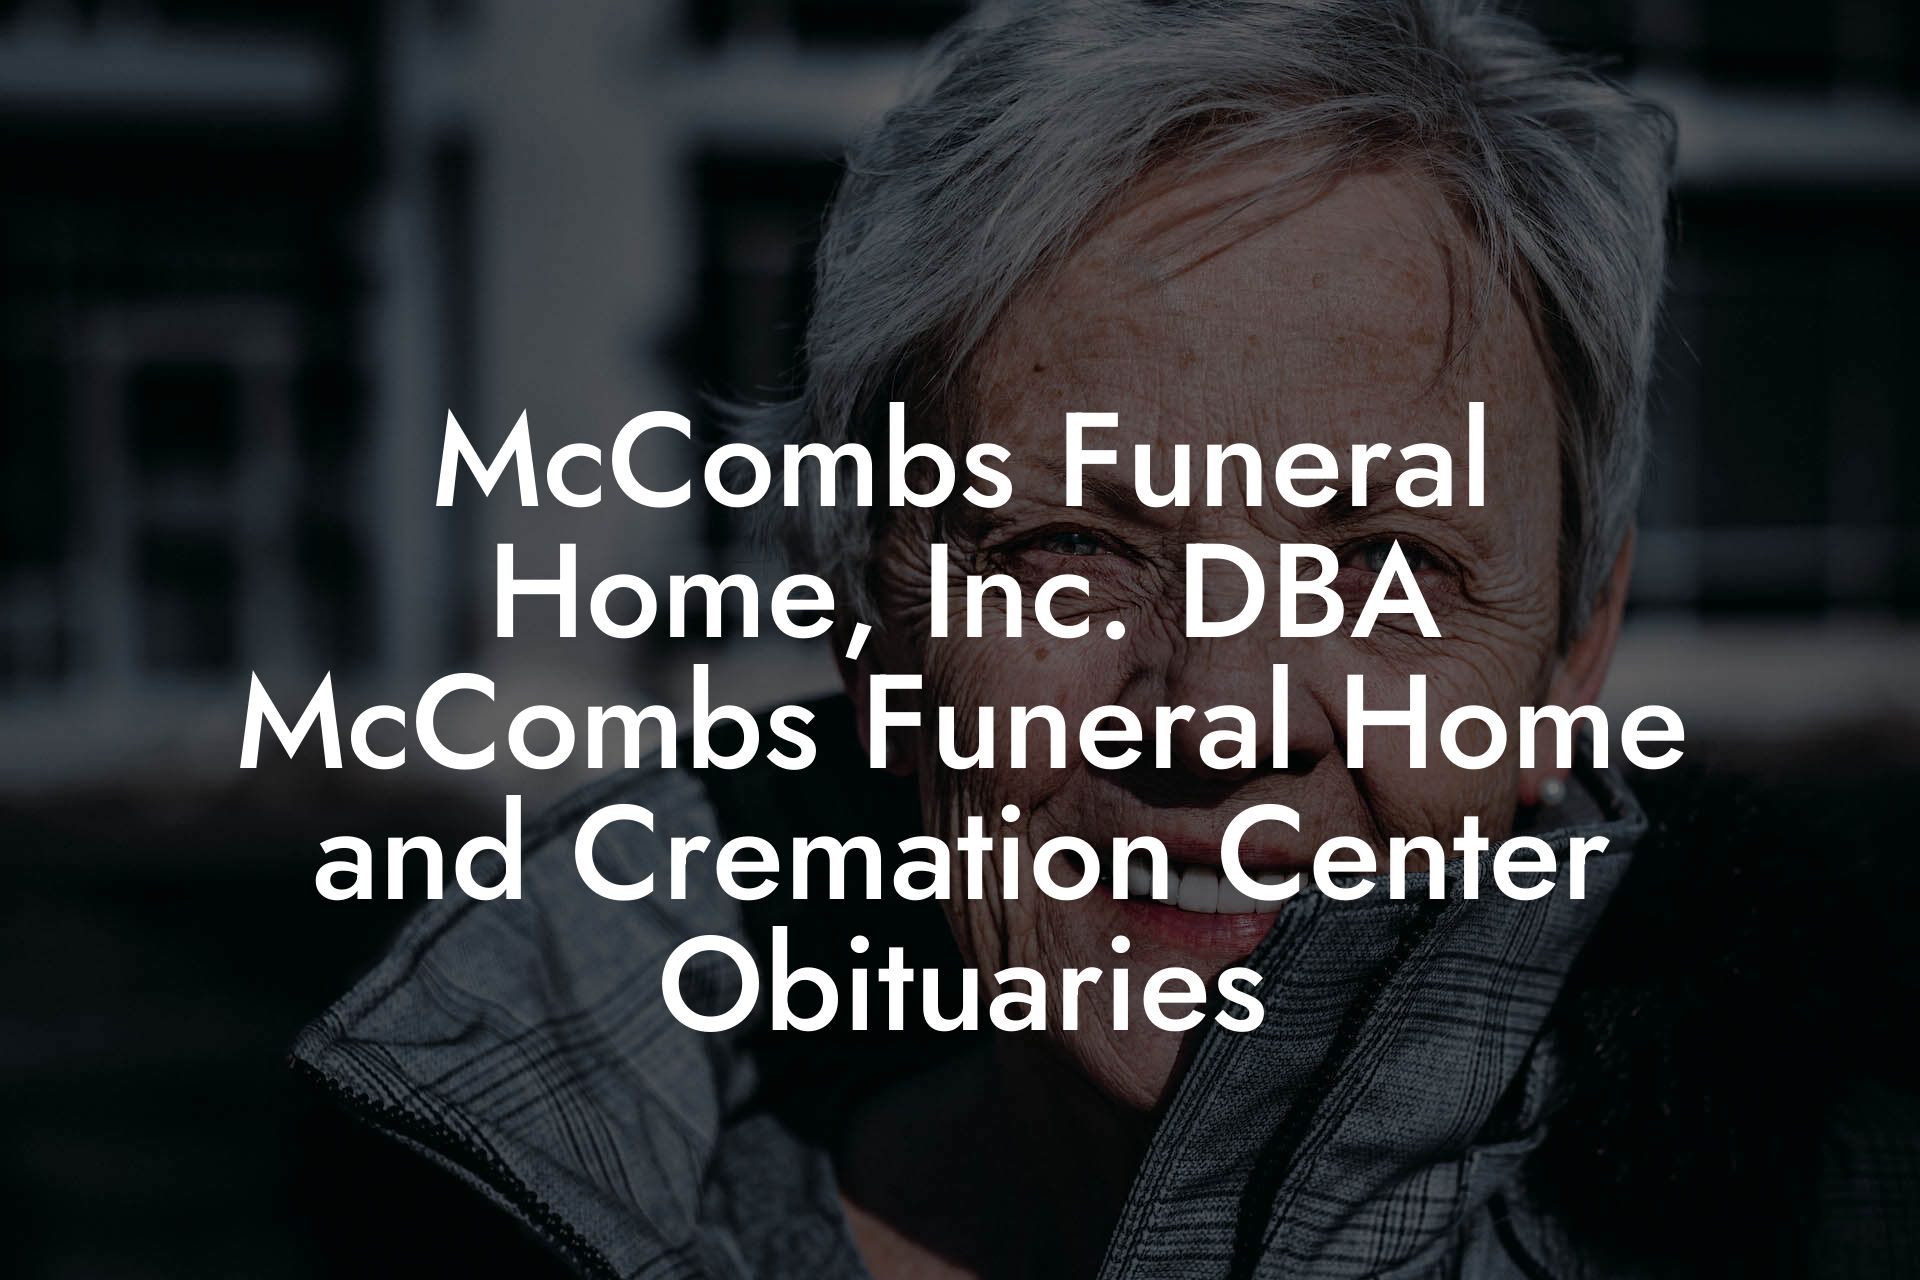 McCombs Funeral Home, Inc. DBA McCombs Funeral Home and Cremation Center Obituaries